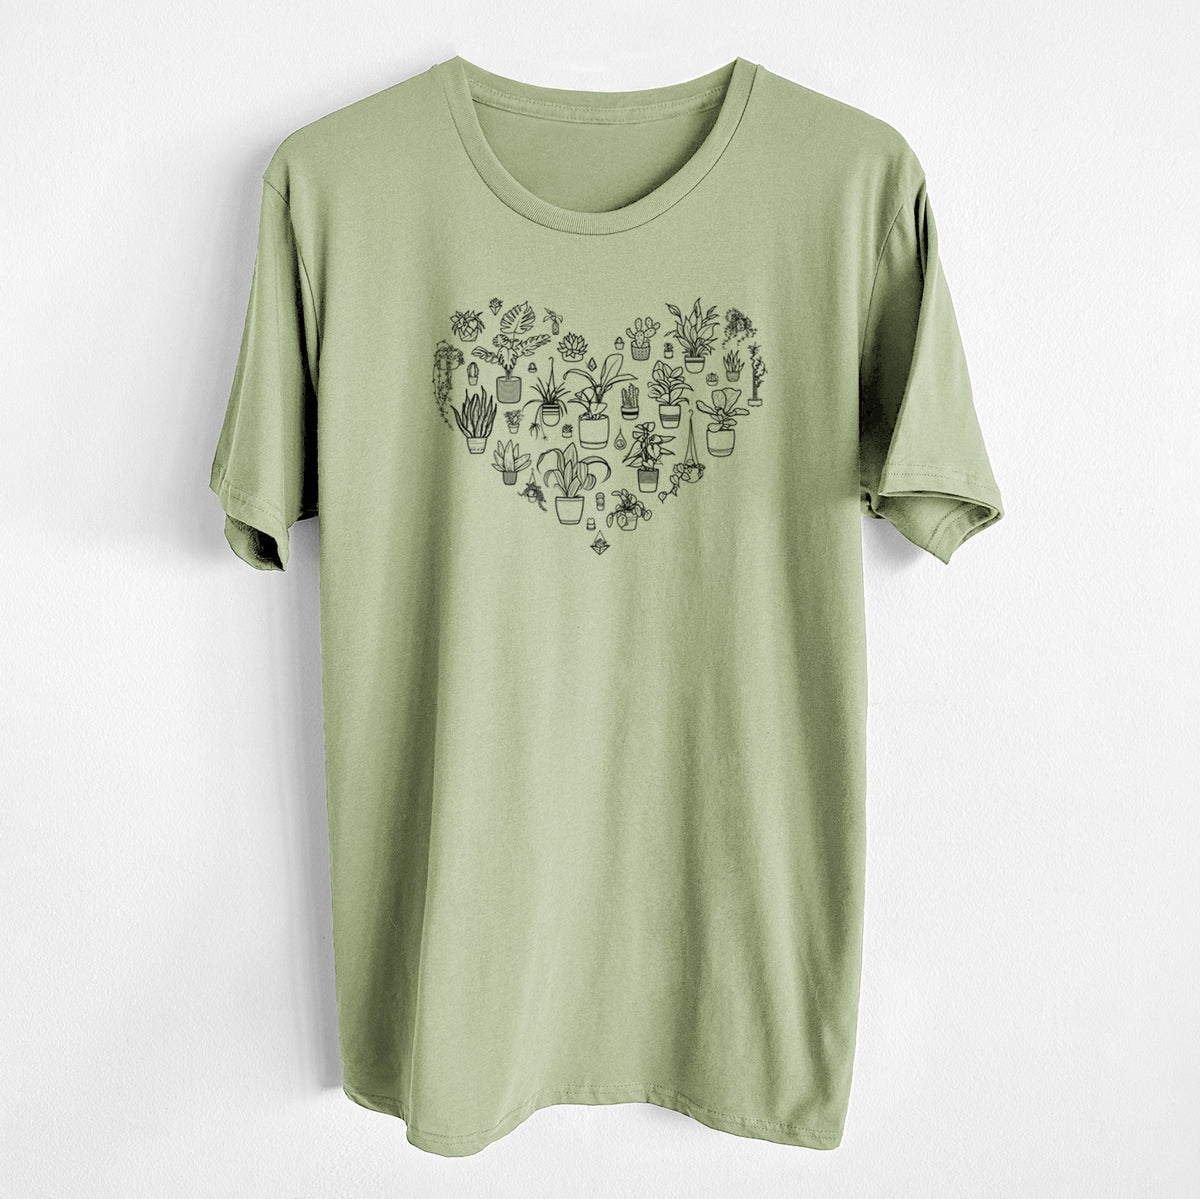 Heart Full of House Plants - Unisex Crewneck - Made in USA - 100% Organic Cotton